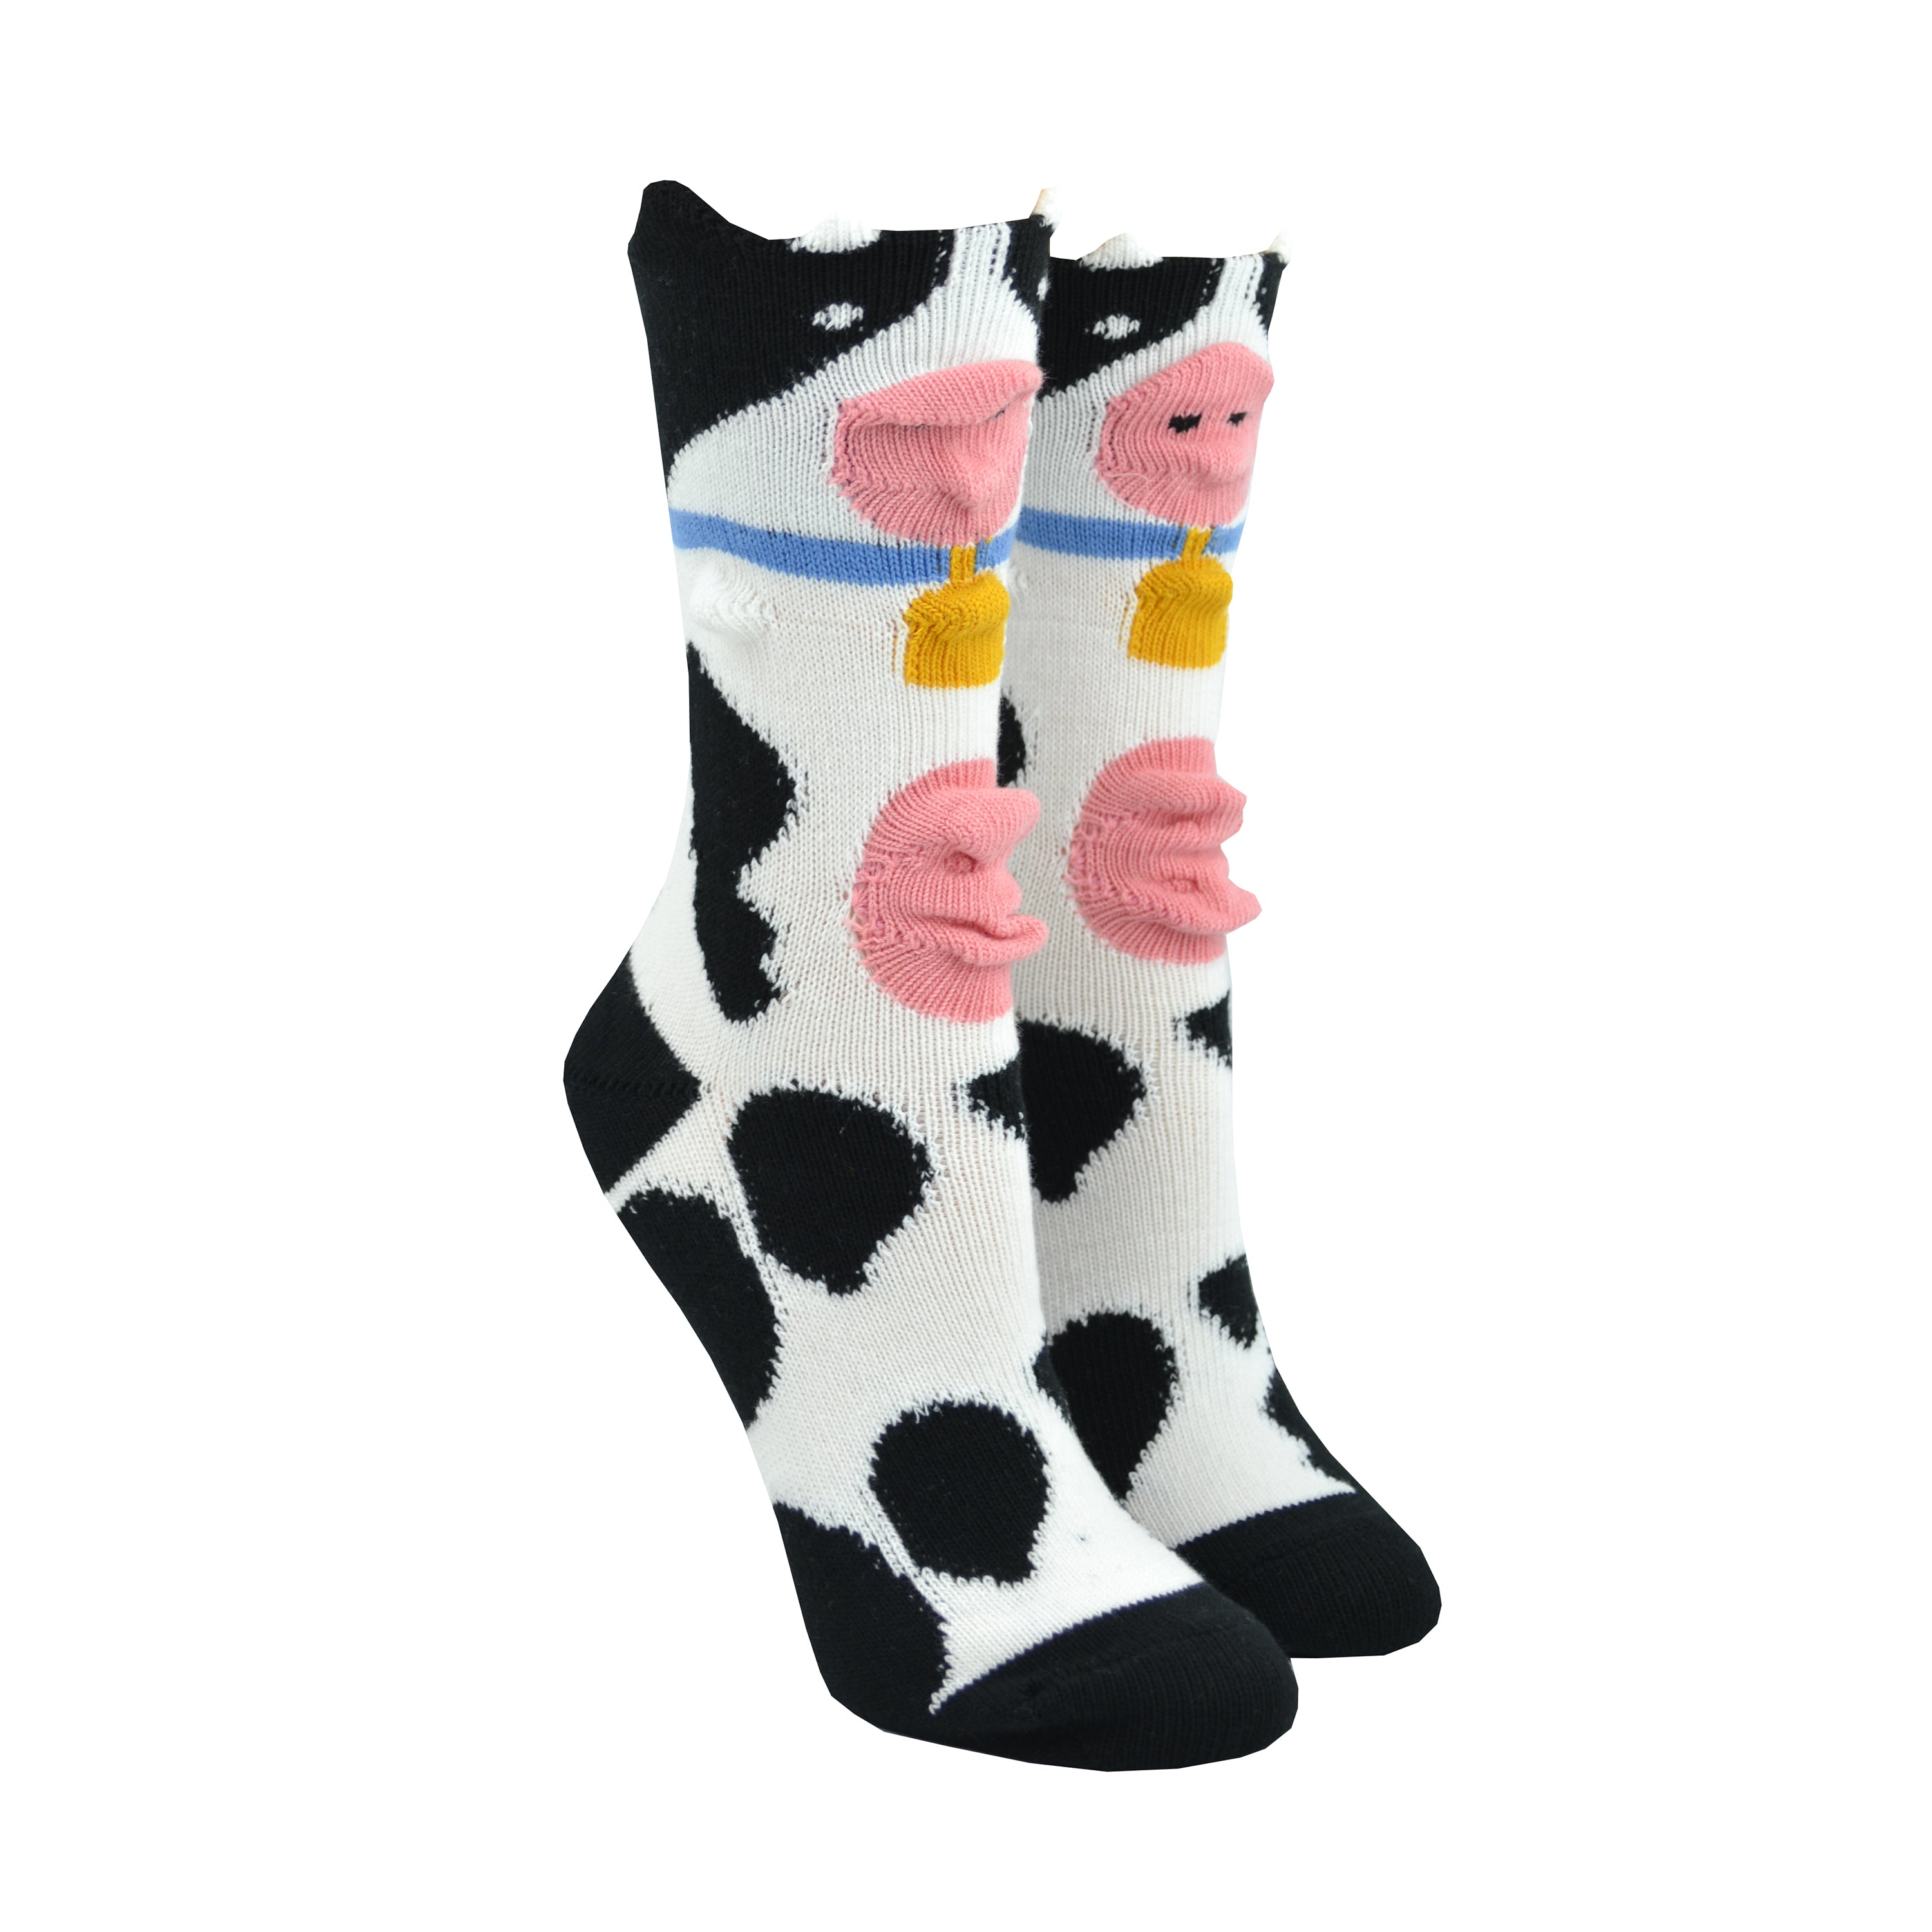 Shown on a foot mold, a pair of Foot Traffic, black and white women's cotton crew socks with three dimensional pattern of cute cow wearing a bell